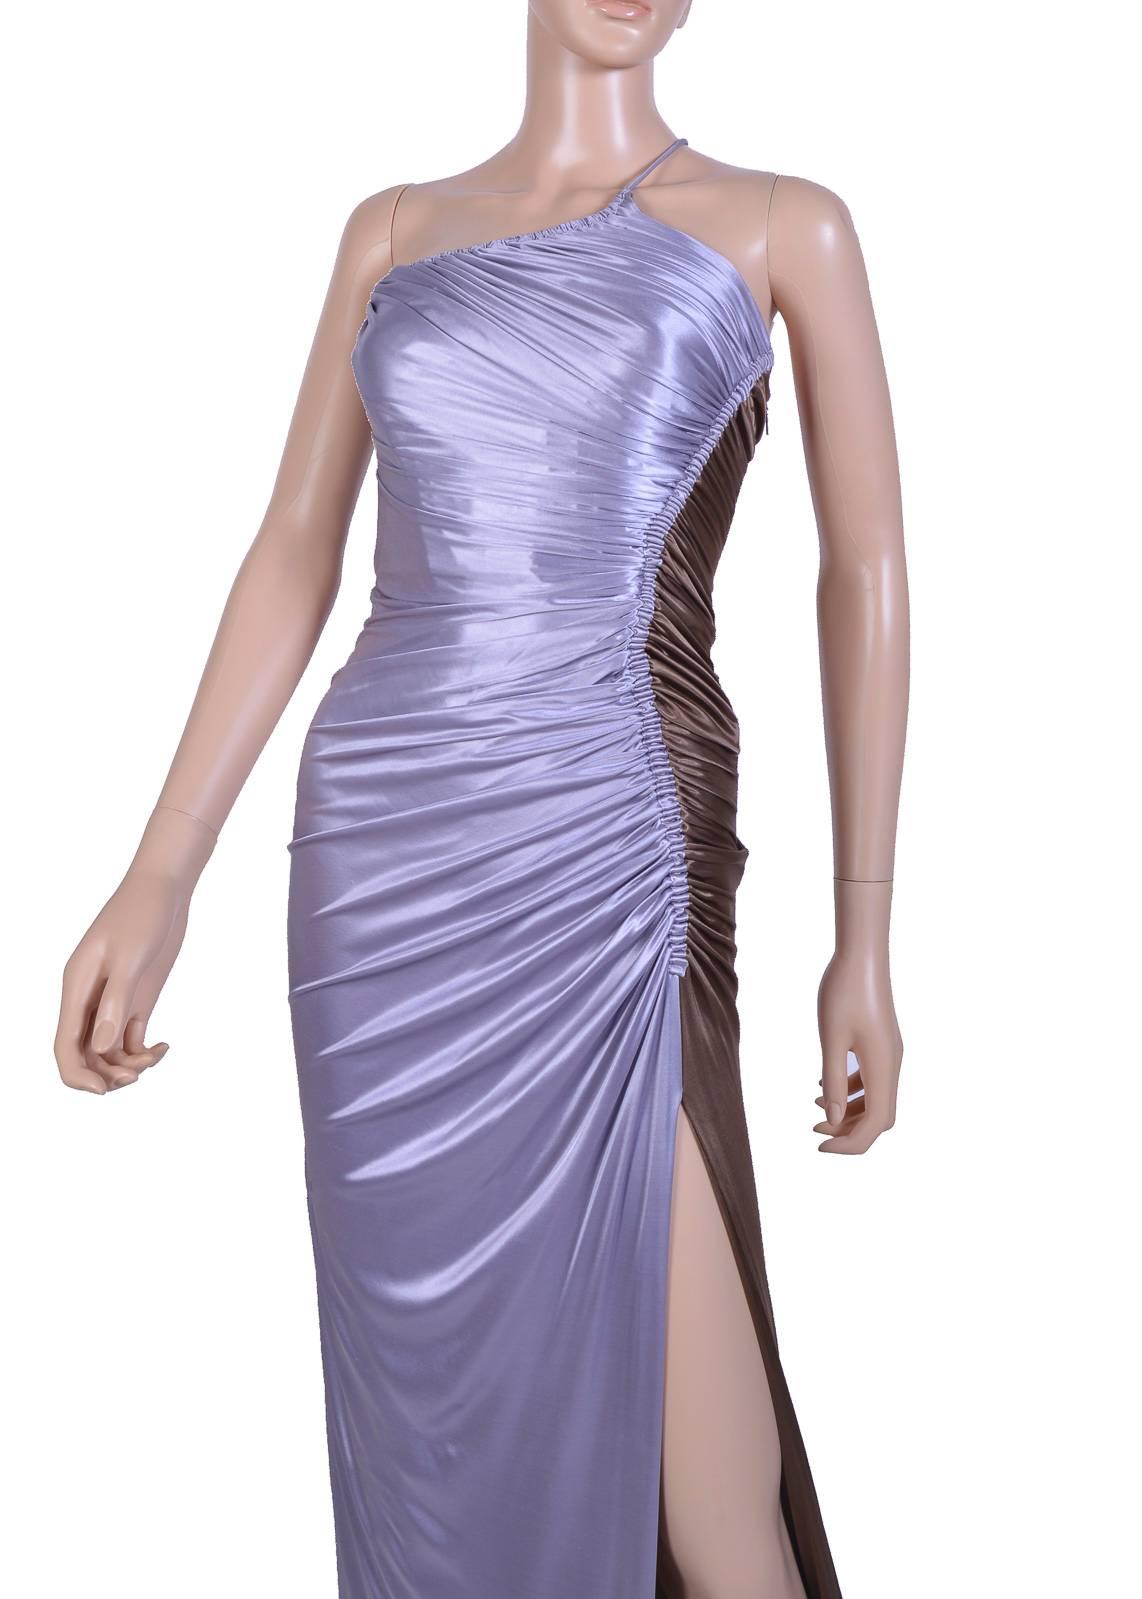 New VERSACE Ruched Color Block Long Dress 

Versace's eveningwear is exquisite. 

This color block gown has been beautifully ruched and finished with long sexy slit

Liquid jersey

IT Size 38 

Made in Italy

New, with tags